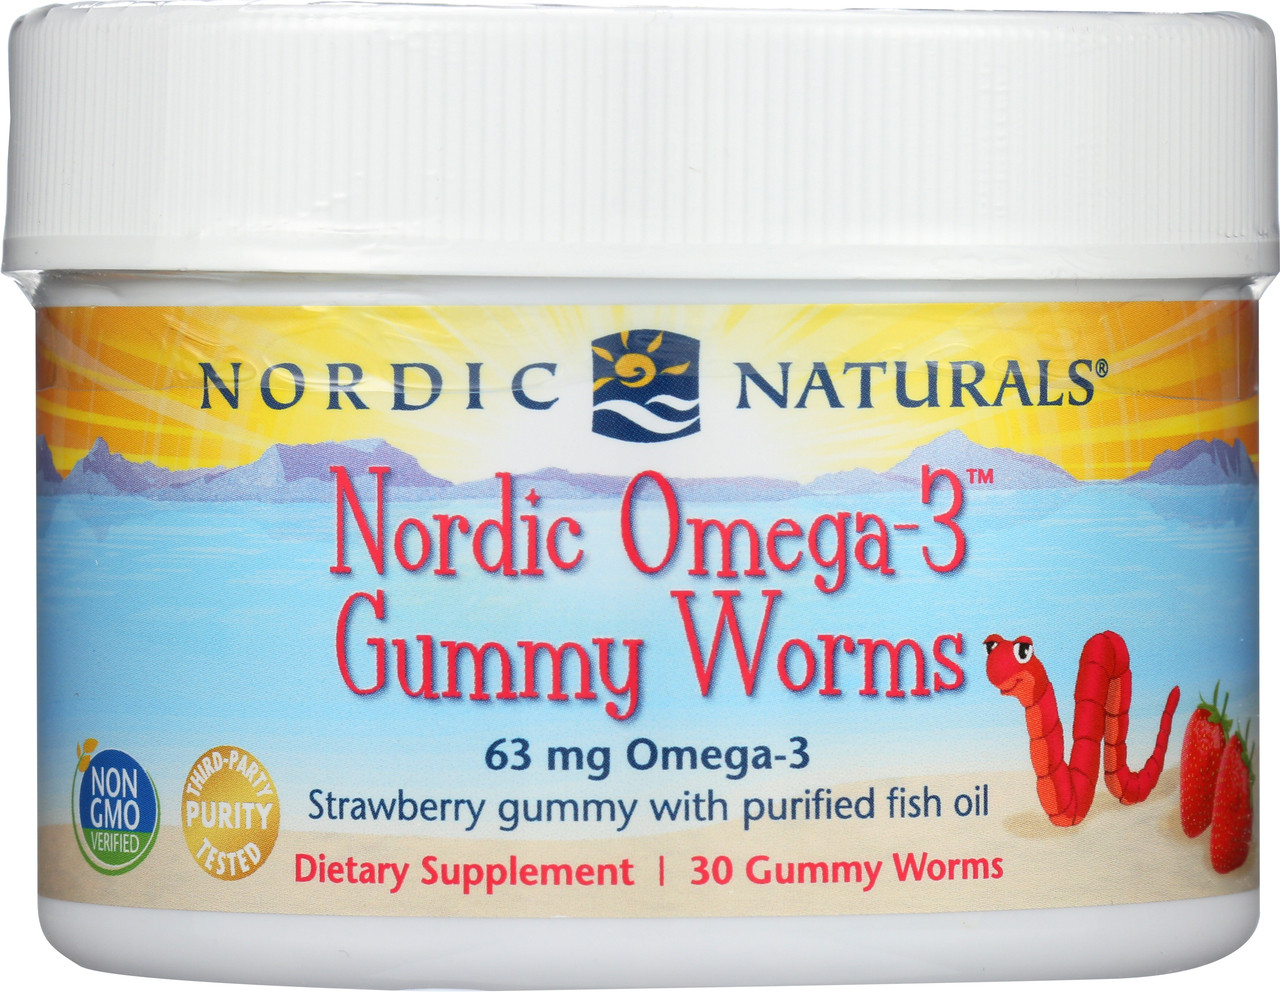 Nordic Naturals NORDIC OMEGA-3 GUMMY WORMS